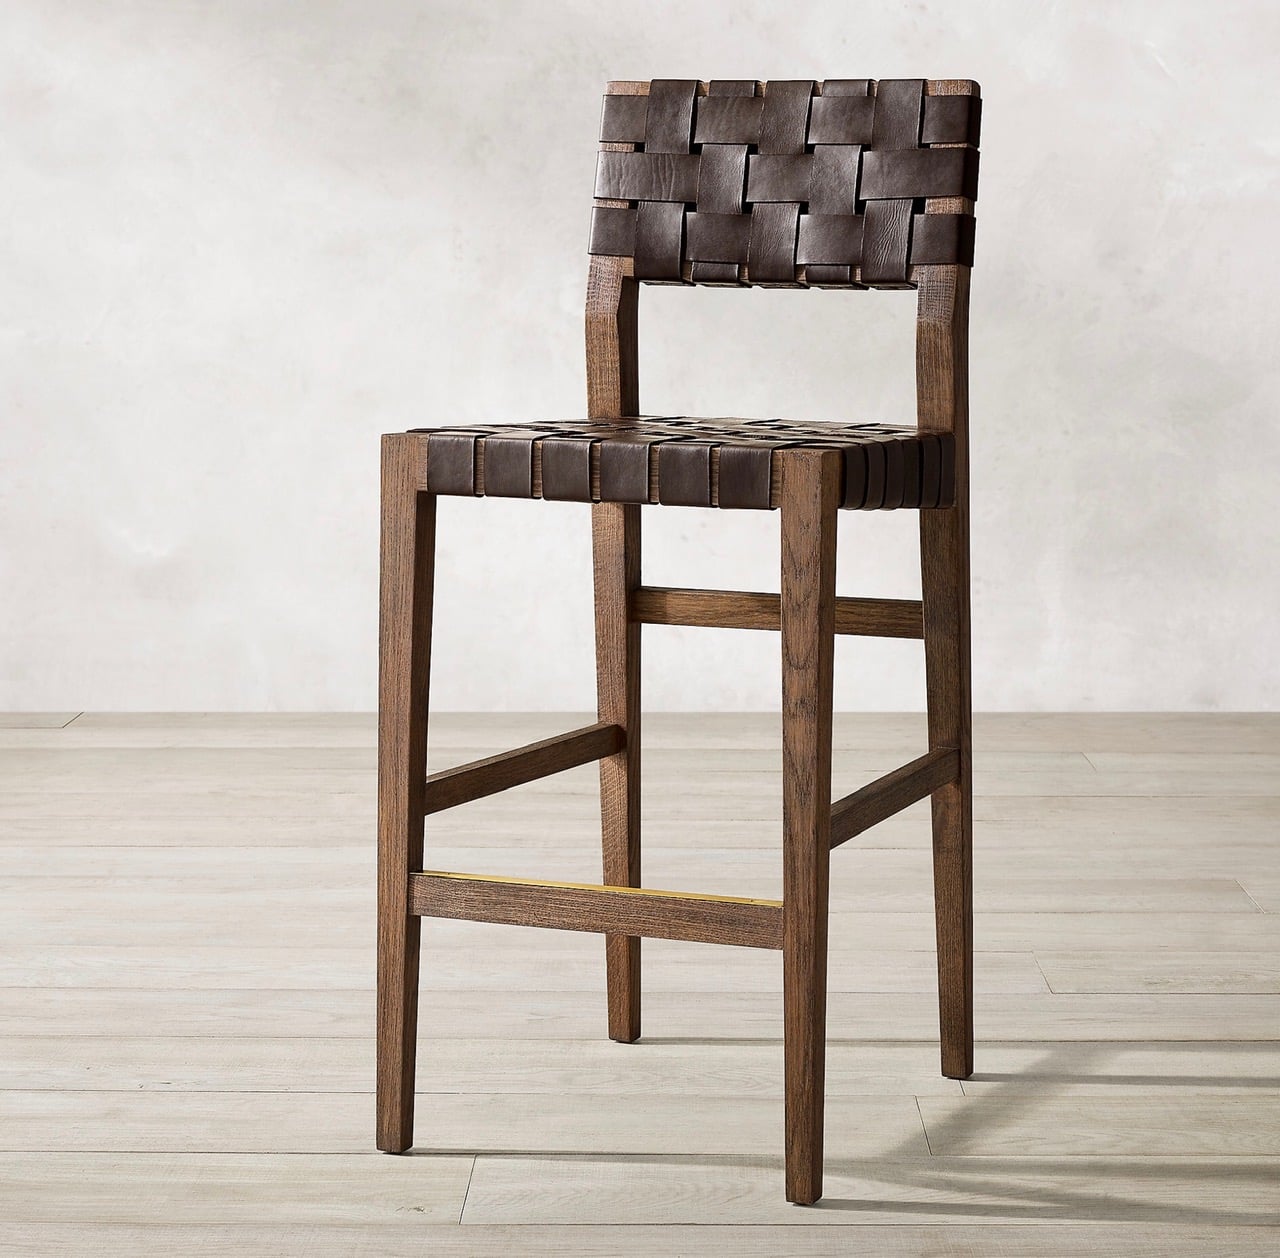 Made to Order Bar Stools Furniture. - BST 057-01